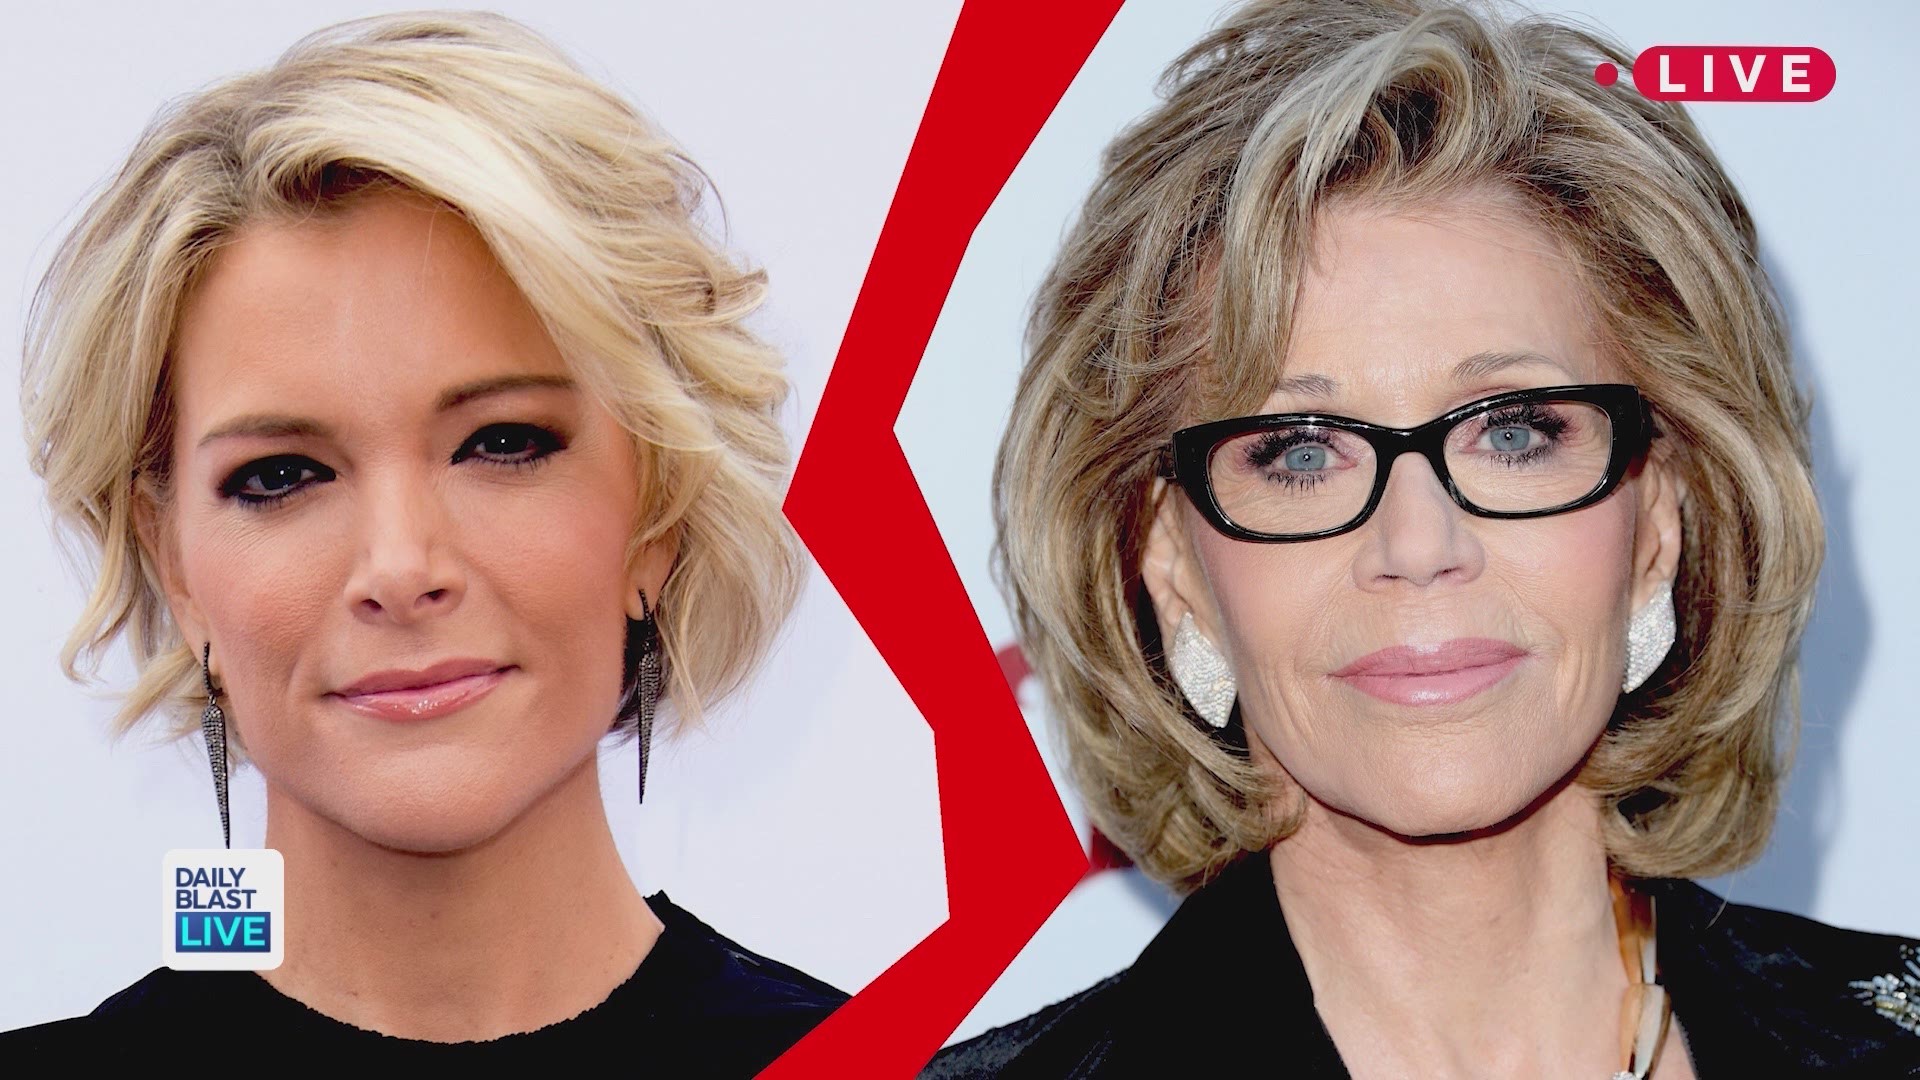 Daily Blast LIVE plays a new game called Celebrity Feuds. Right now, everyone is talking about the mega-feud between Jane Fonda and Megyn Kelly. Play along and test your knowledge on some other infamous celebrity feuds! 